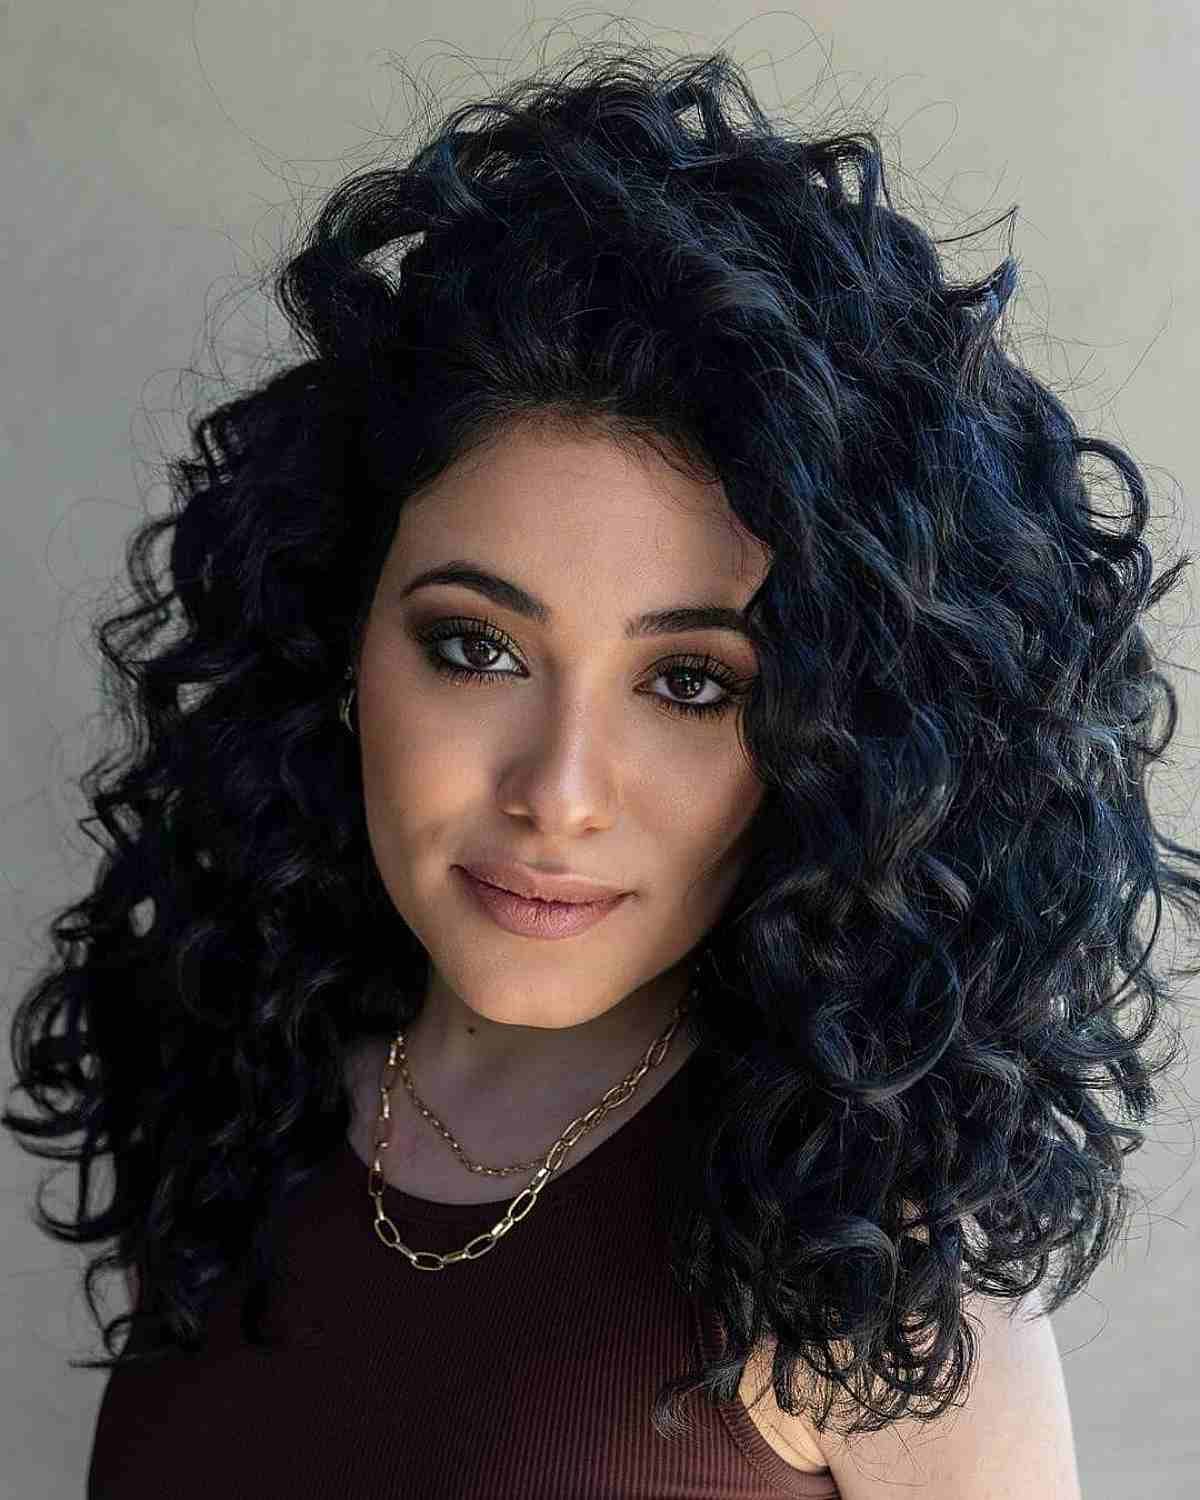 62 Best Shoulder Length Curly Hair Cuts & Styles In 2022 Regarding 2018 Layered Curly Medium Length Hairstyles (View 19 of 25)